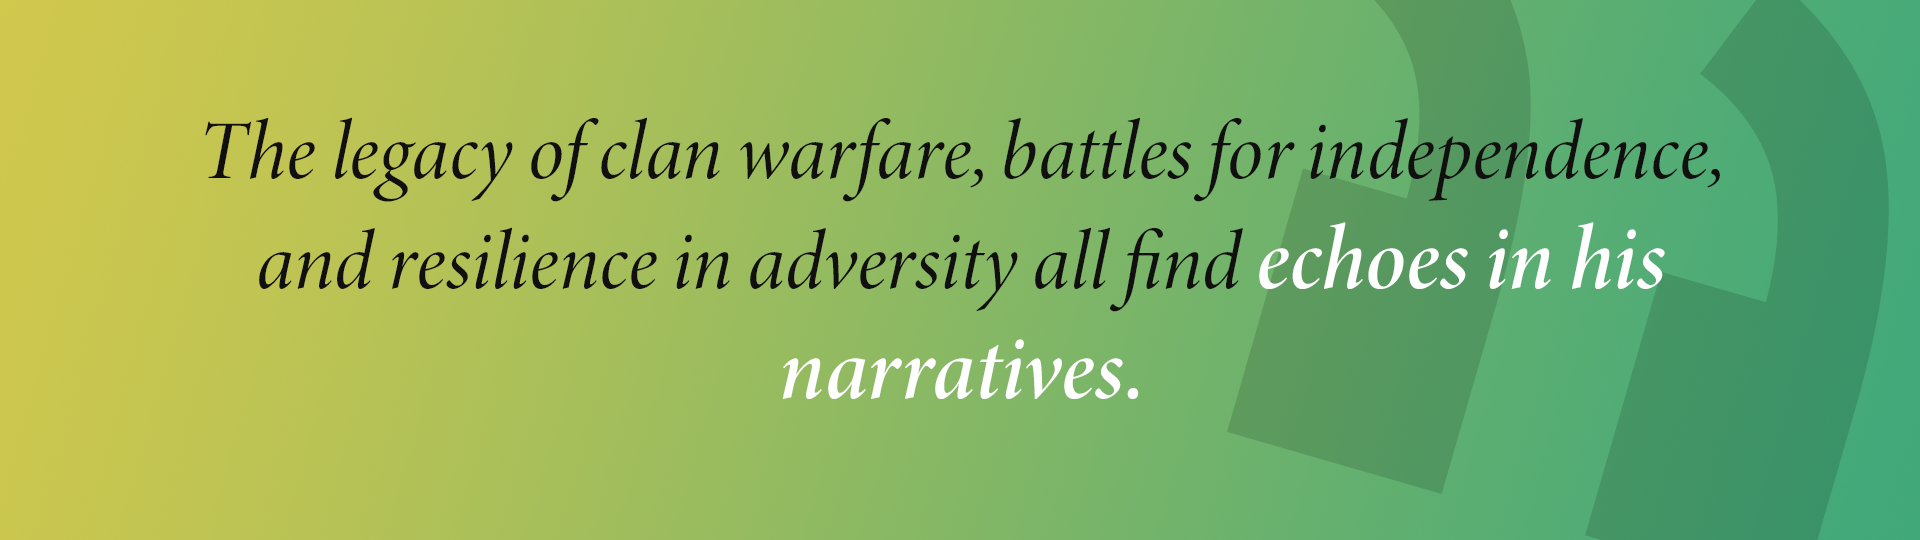 The legacy of clan warfare, battles for independence, and resilience in adversity all find echoes in his
narratives.